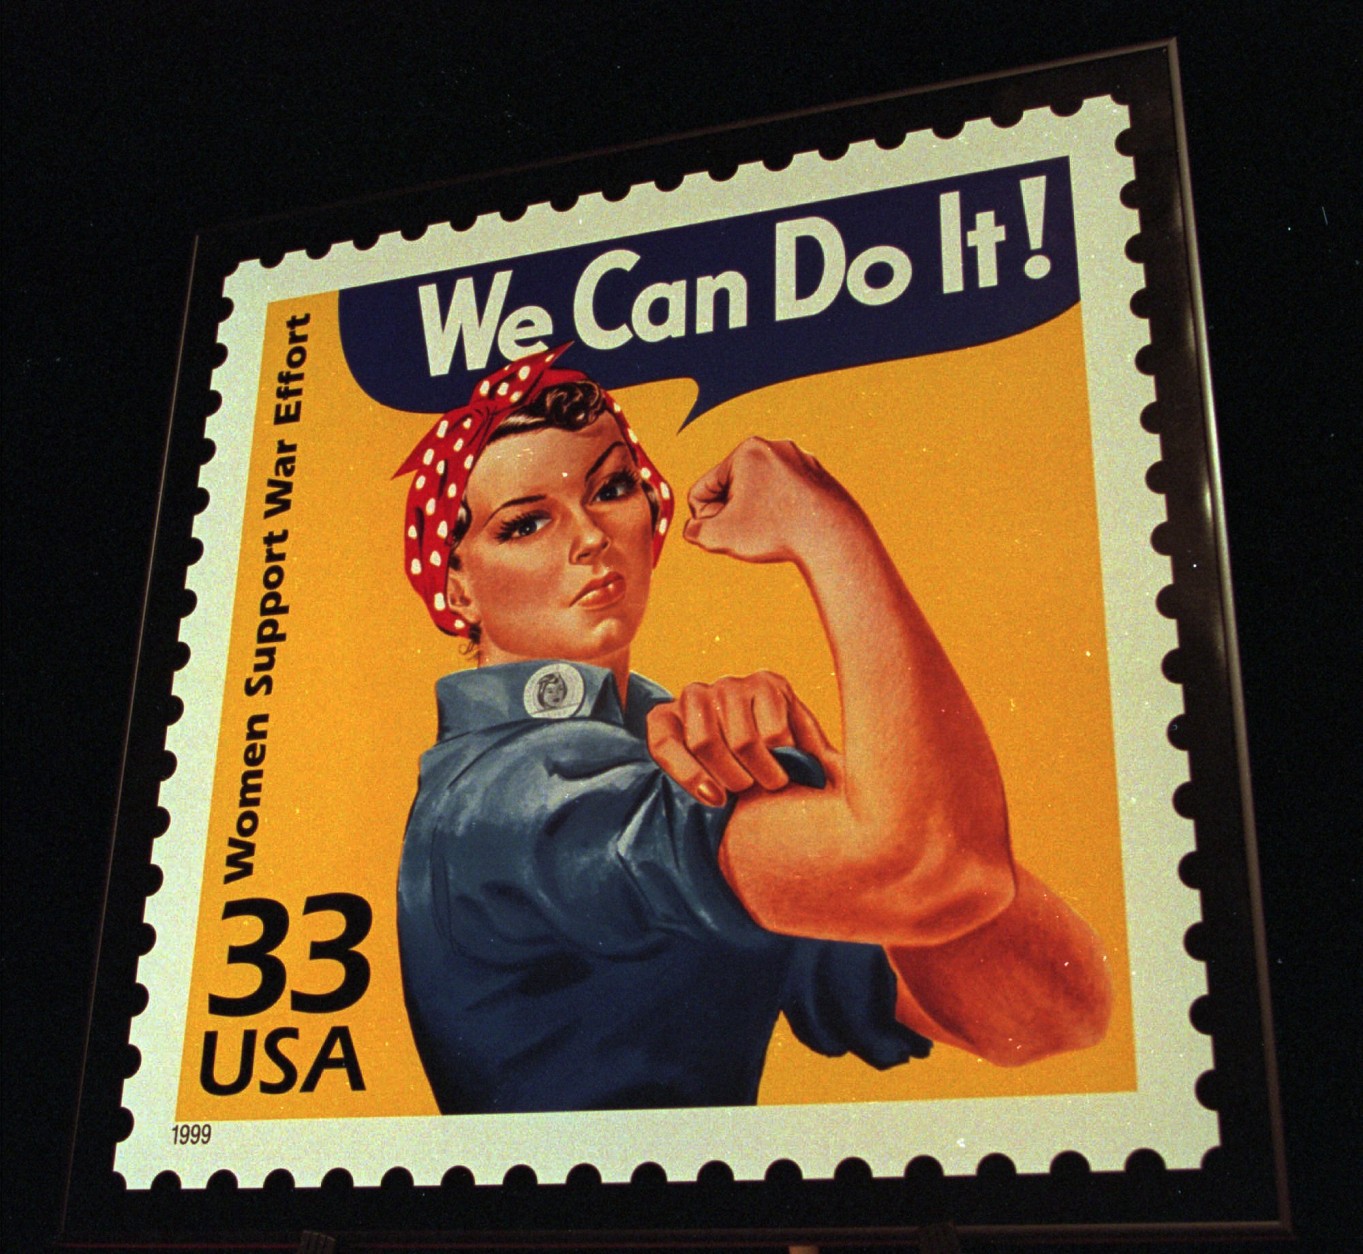 The United States Post Office presented an enlargement of the Celebrate the Century, Women Support the War stamp depicting Rosie the Riveter to the Portland Harbor Museum in South Portland, Maine,  Friday, June 25, 1999. The stamp is part of a 15 stamp set honoring people, events, and lifestyles of the 1940's. (AP Photo/Joan Seidel)